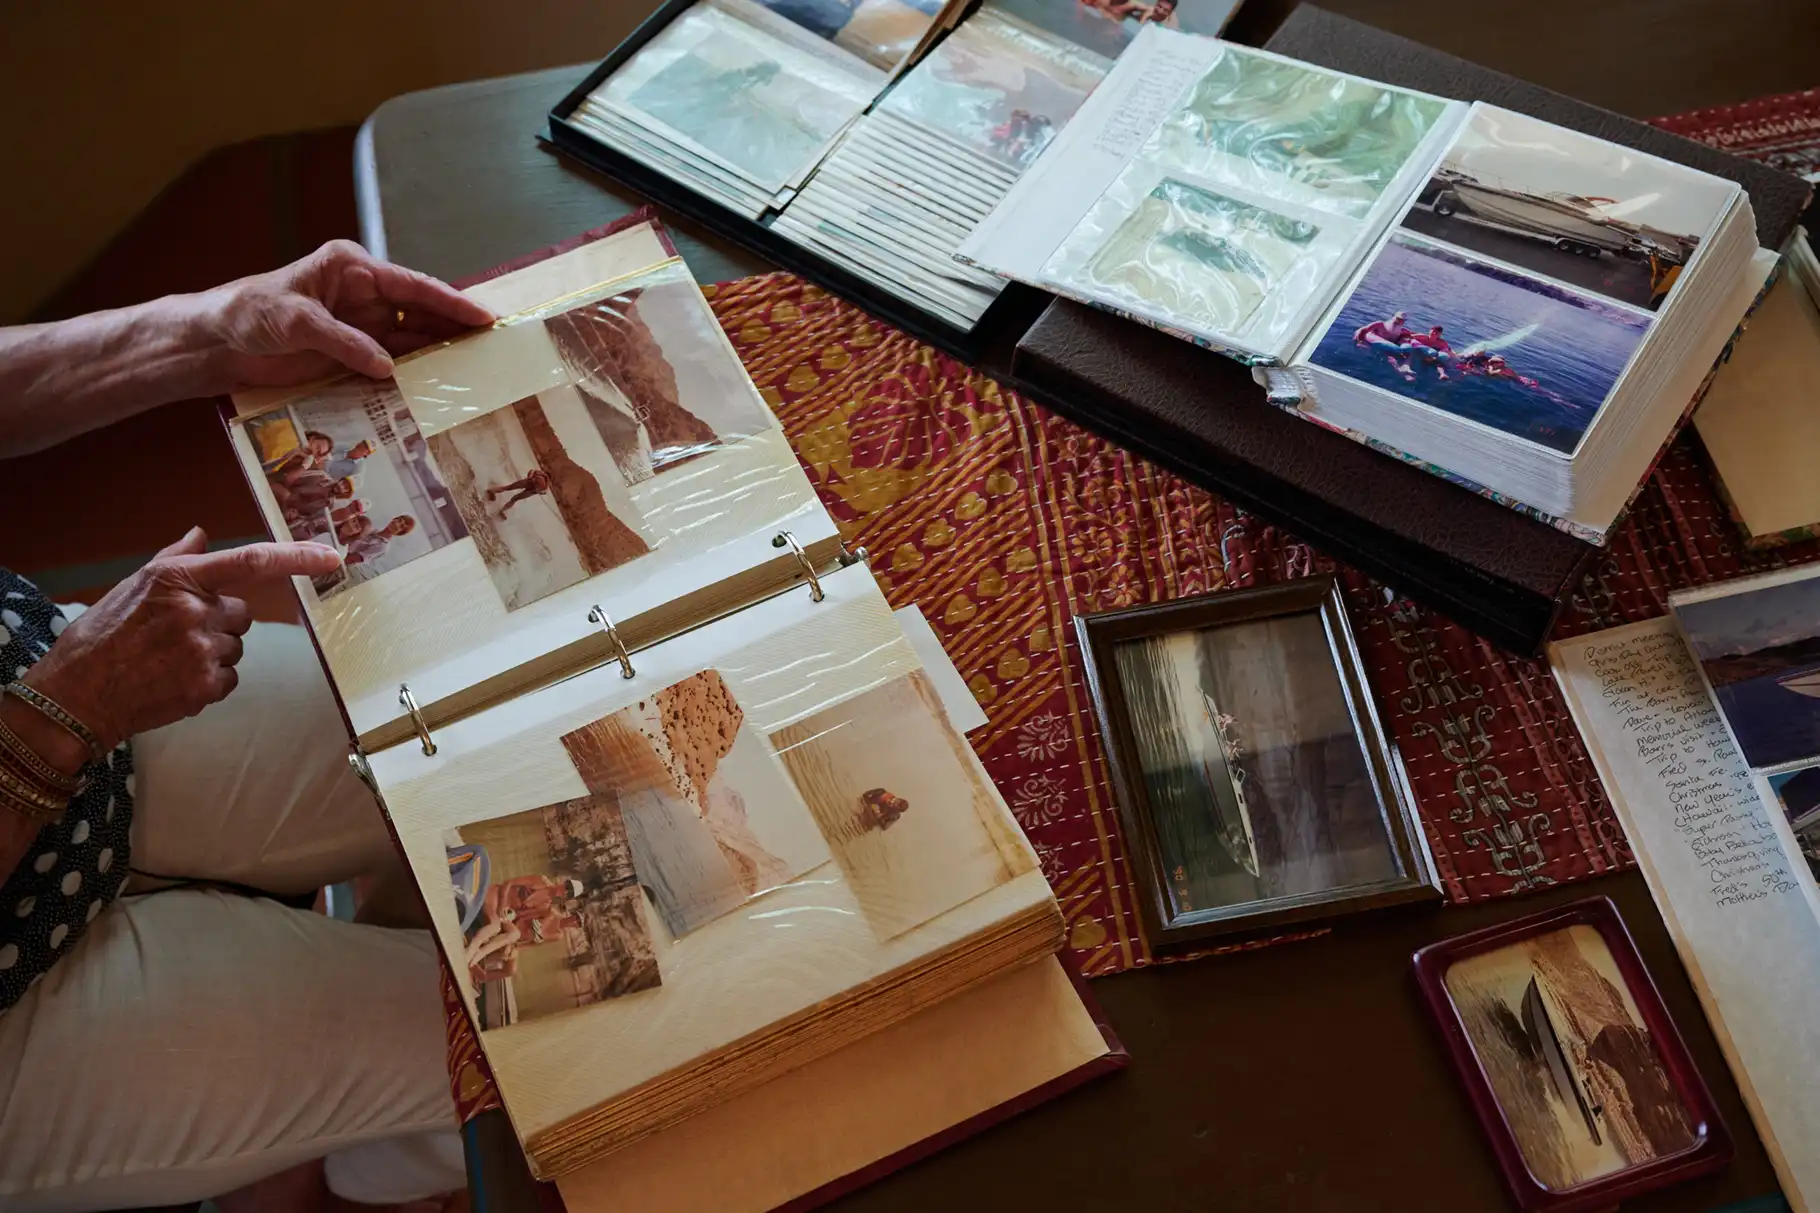 DiManno flips through the Browning photo album containing memories of the years he spent at Lake Mead.